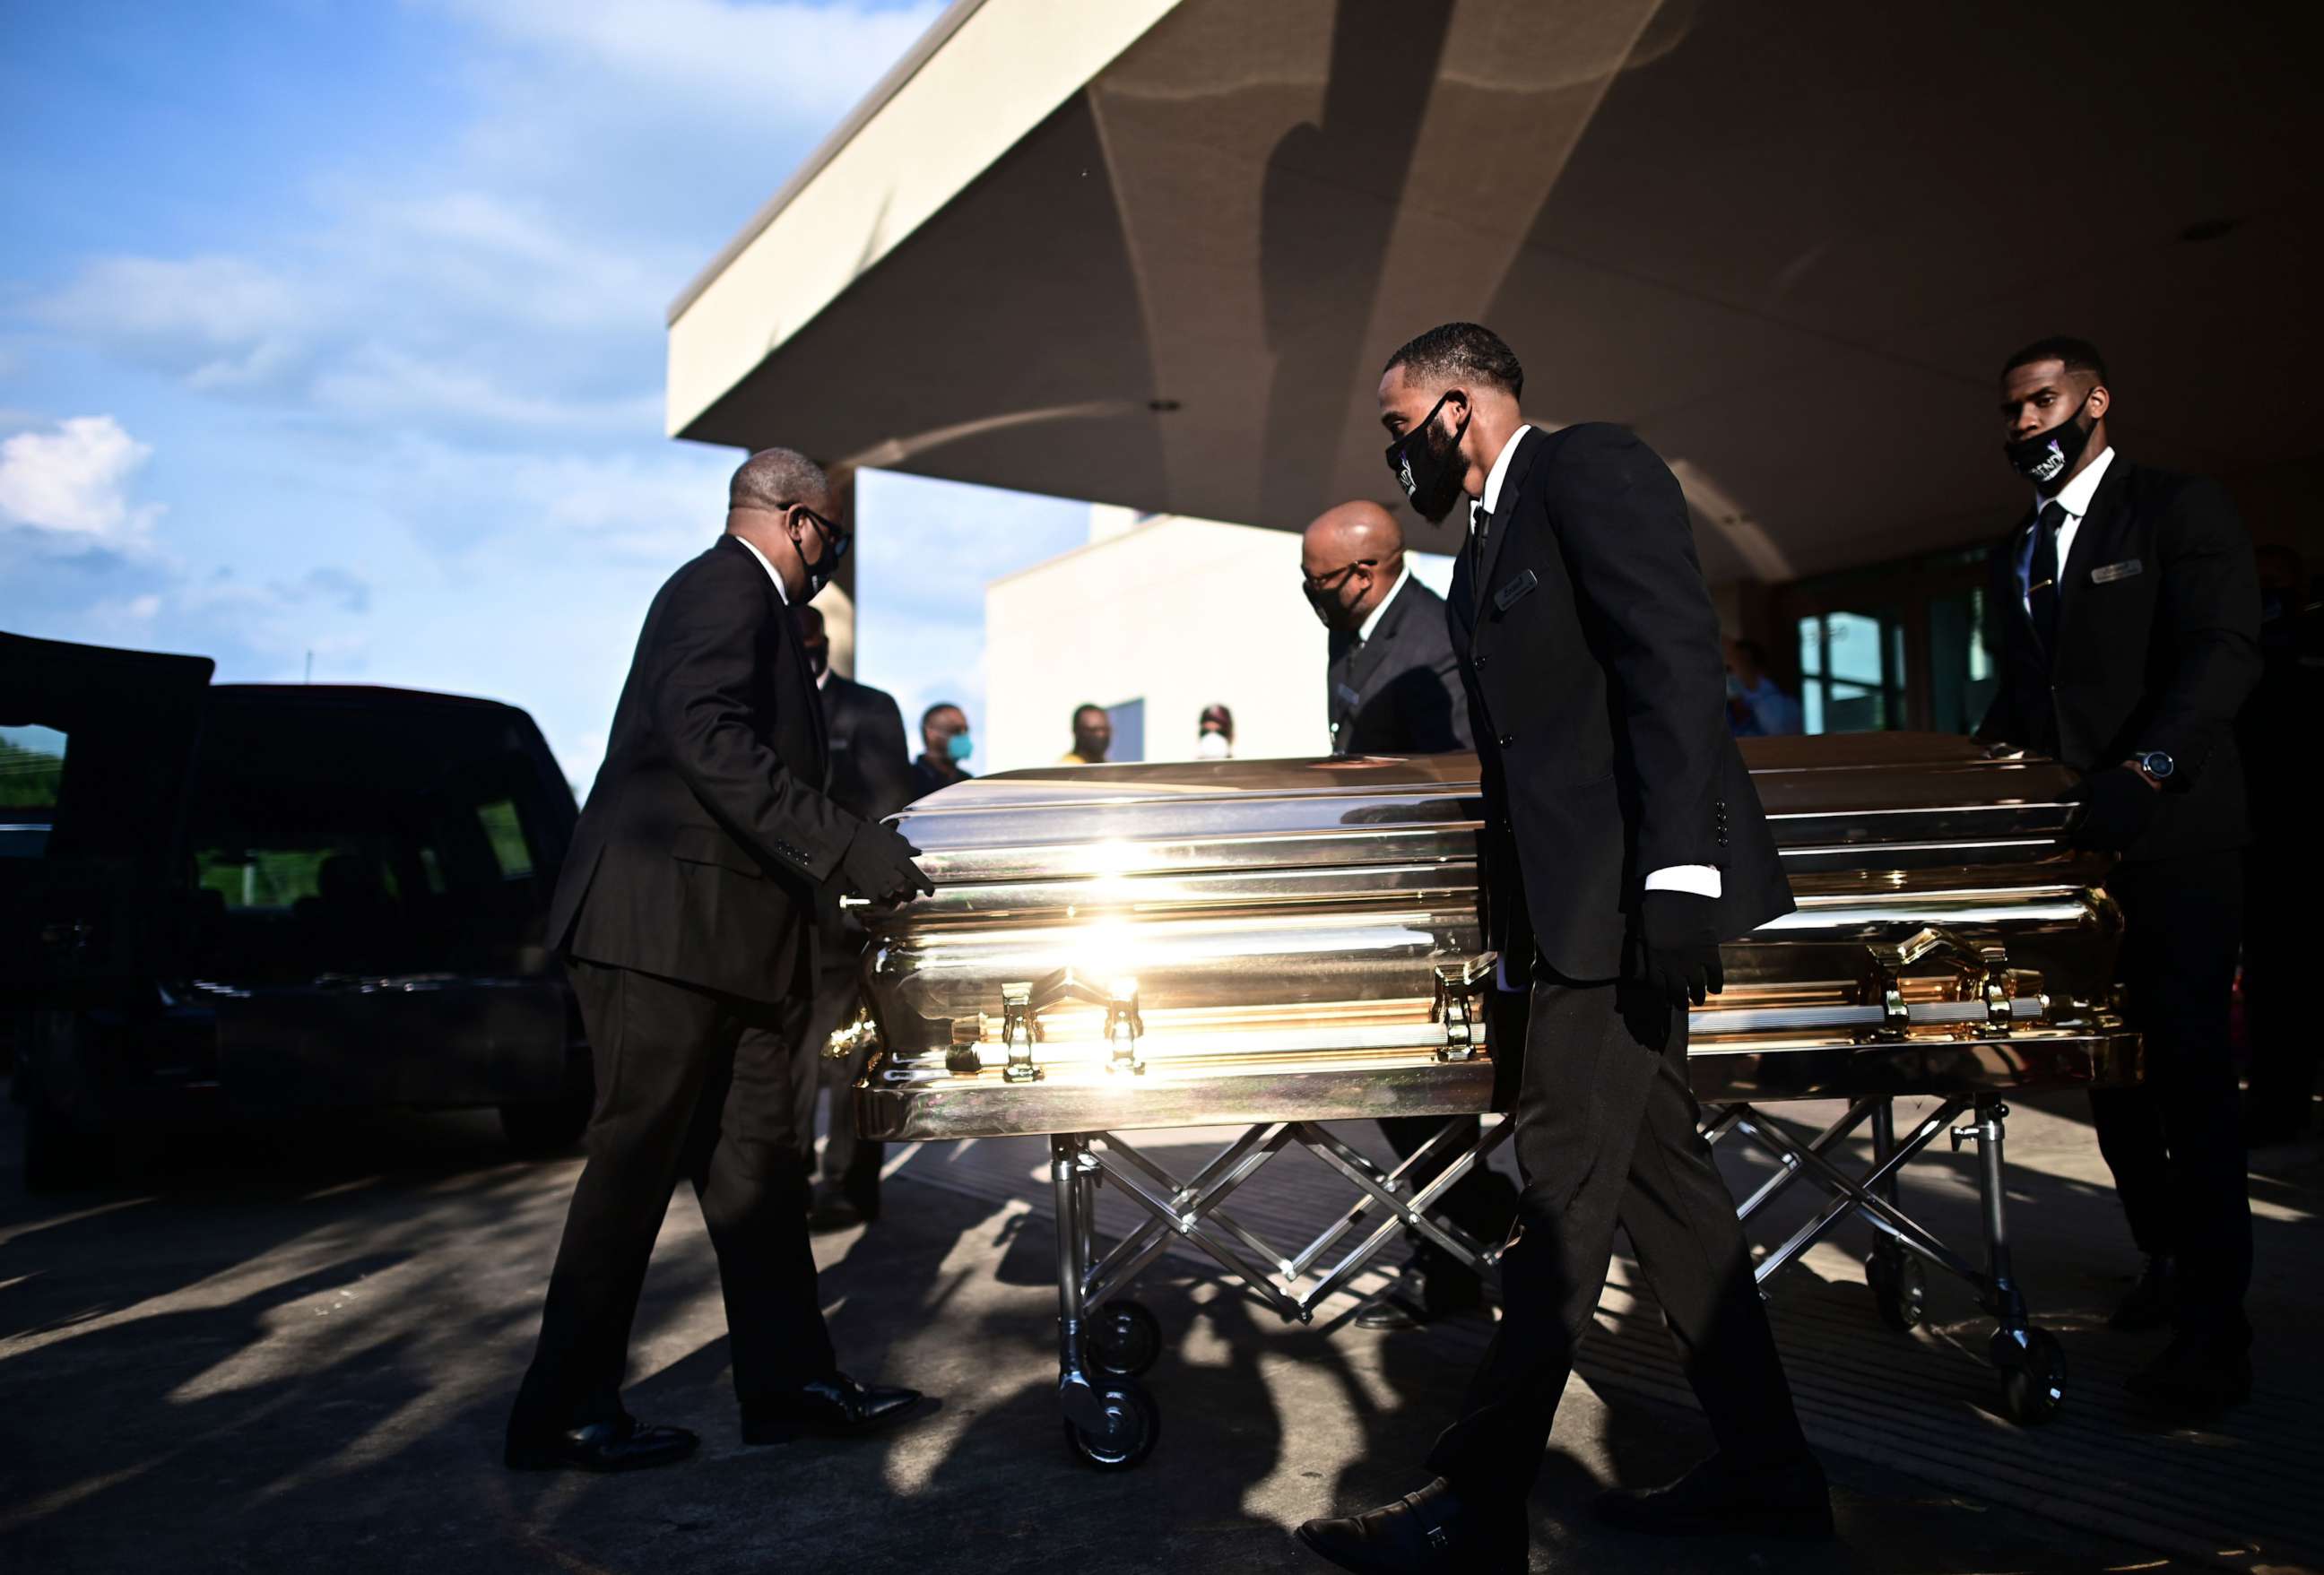 PHOTO: Pallbearers move the casket of George Floyd after a public viewing at The Fountain of Praise church in Houston, Texas, on June 8, 2020.